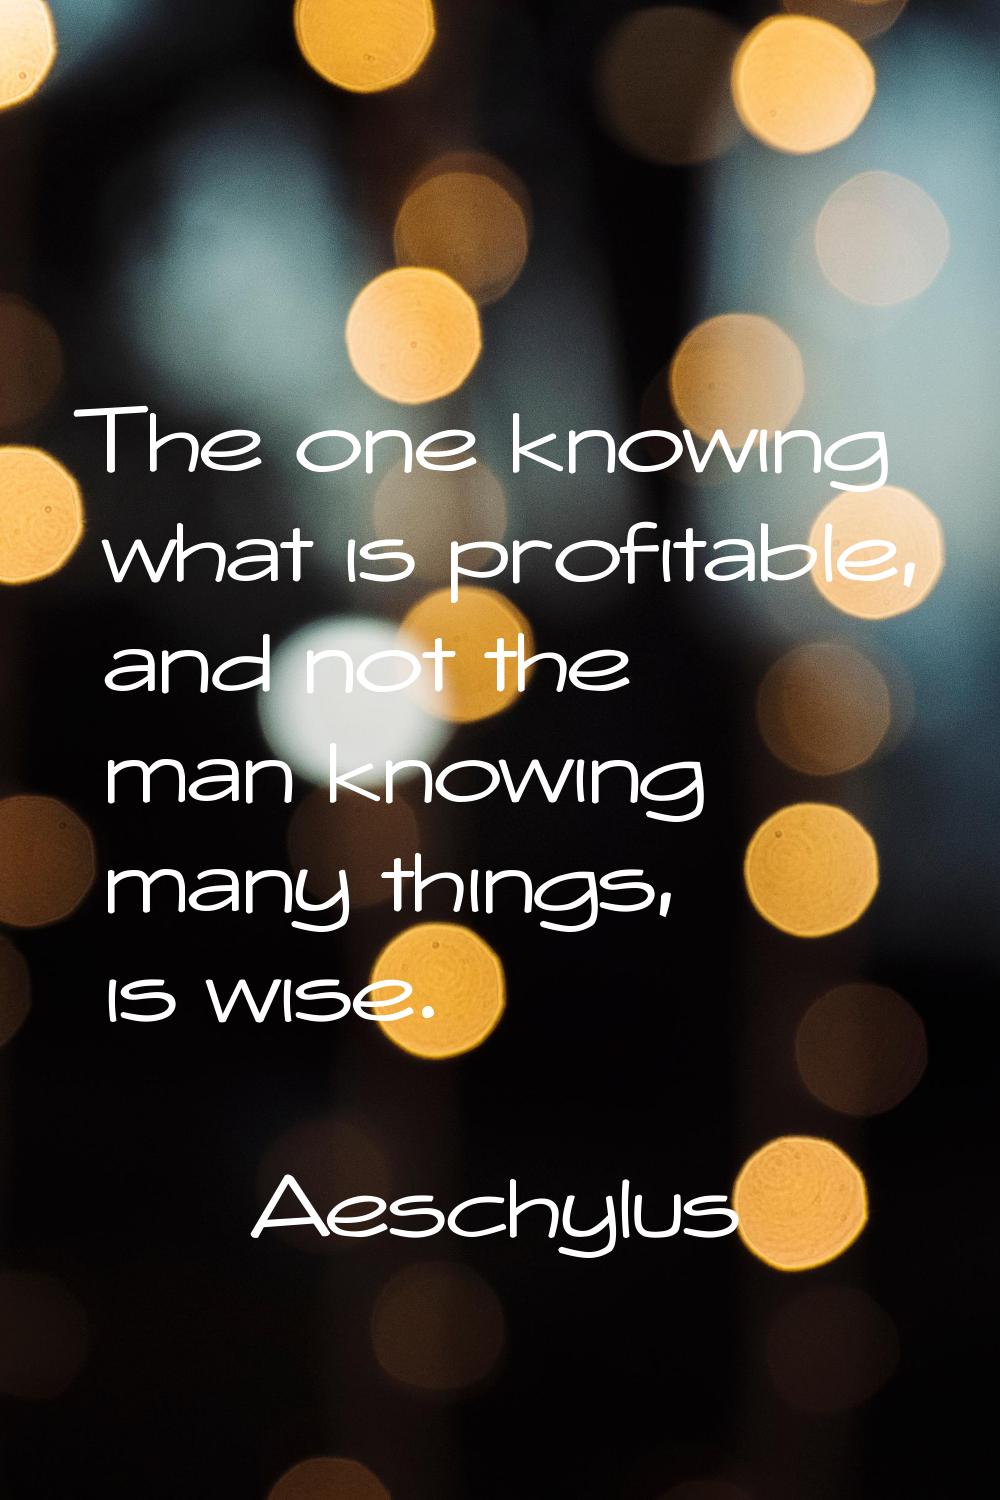 The one knowing what is profitable, and not the man knowing many things, is wise.